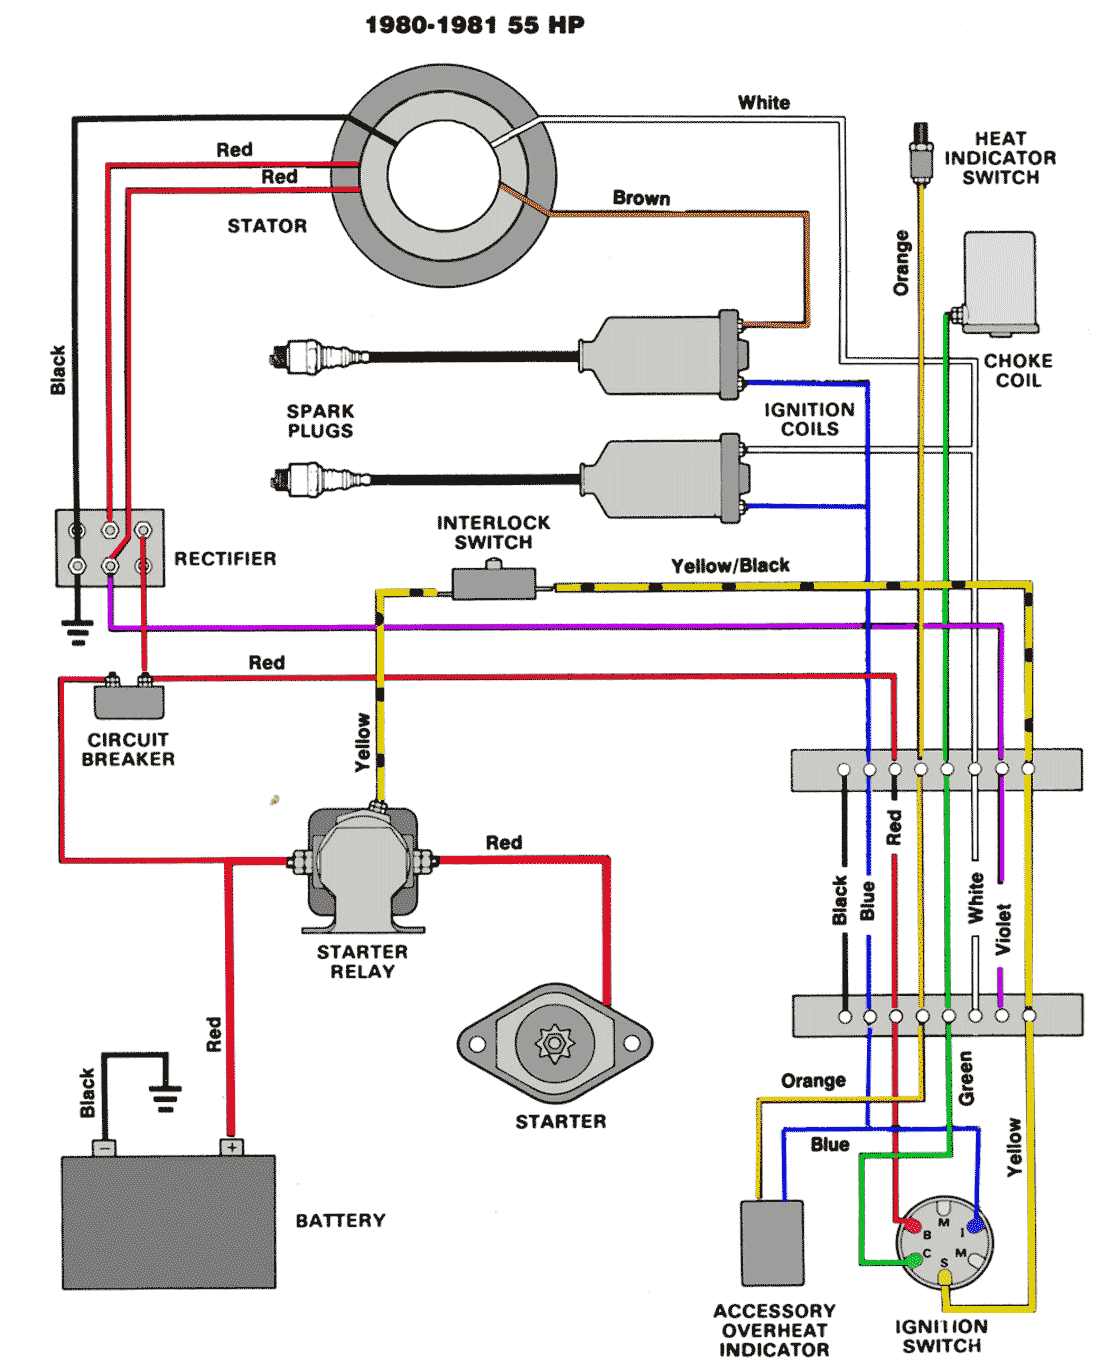 2005 Mercury Outboard Ignition Switch Wiring Diagram from maxrules.com